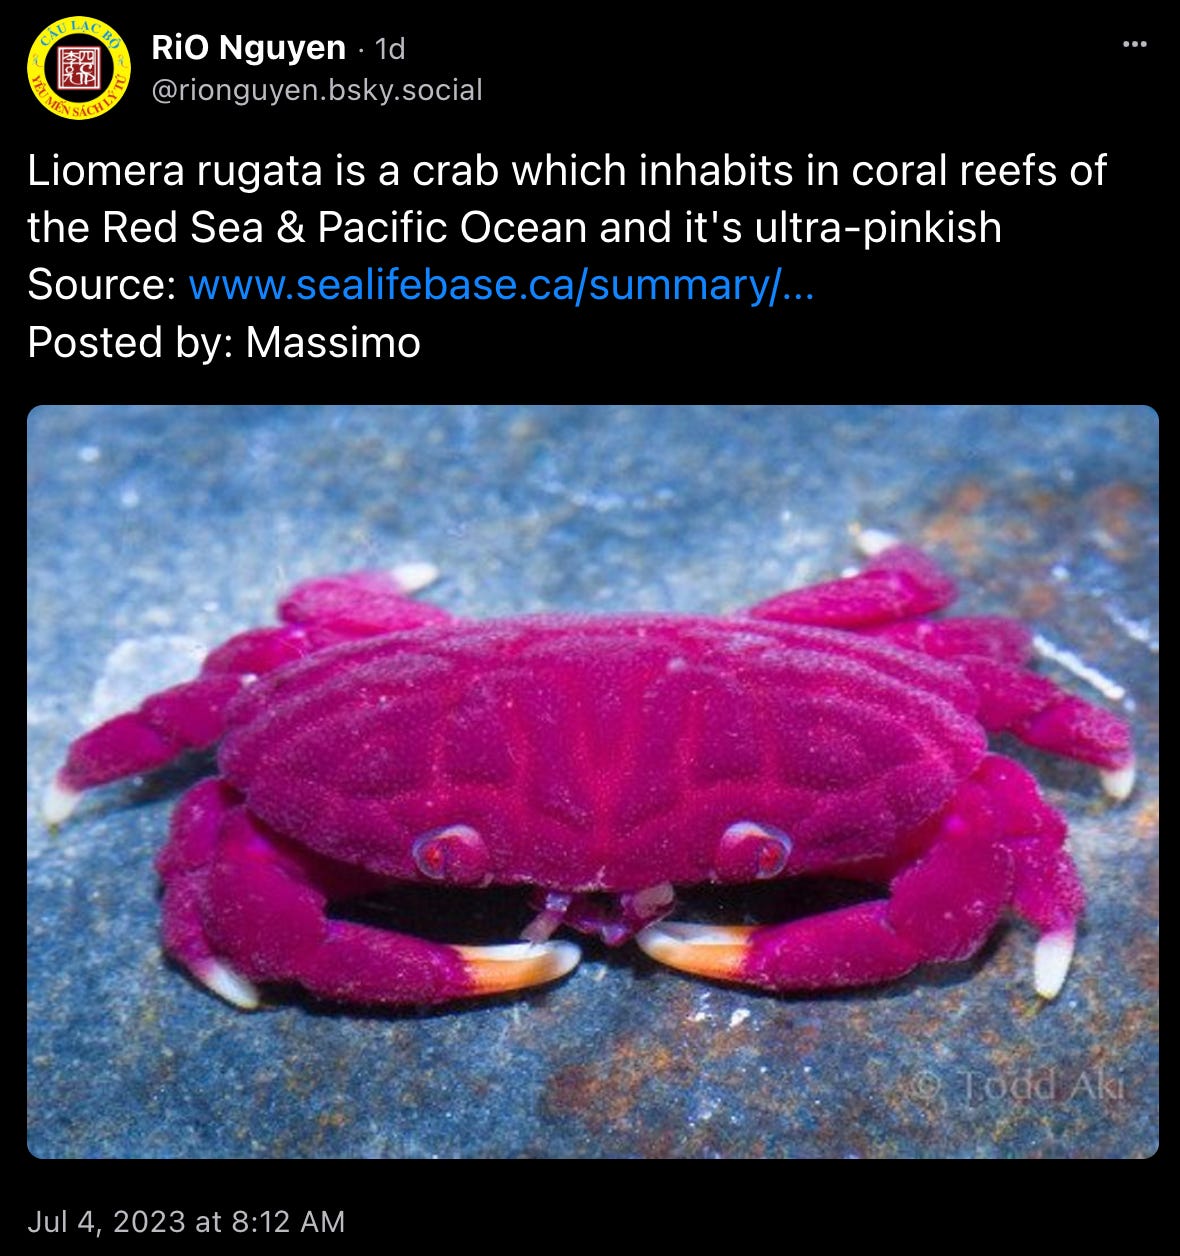 Rio Nguyen: “Liomera rugata is a crab which inhabits in coral reefs of the Red Sea & Pacific Ocean and it's ultra-pinkish,  Source: https://www.sealifebase.ca/summary/Liomera-rugata.html, Posted by: Massimo” with a picture of an incredible fuzzy-looking neon pink-purple crab. 